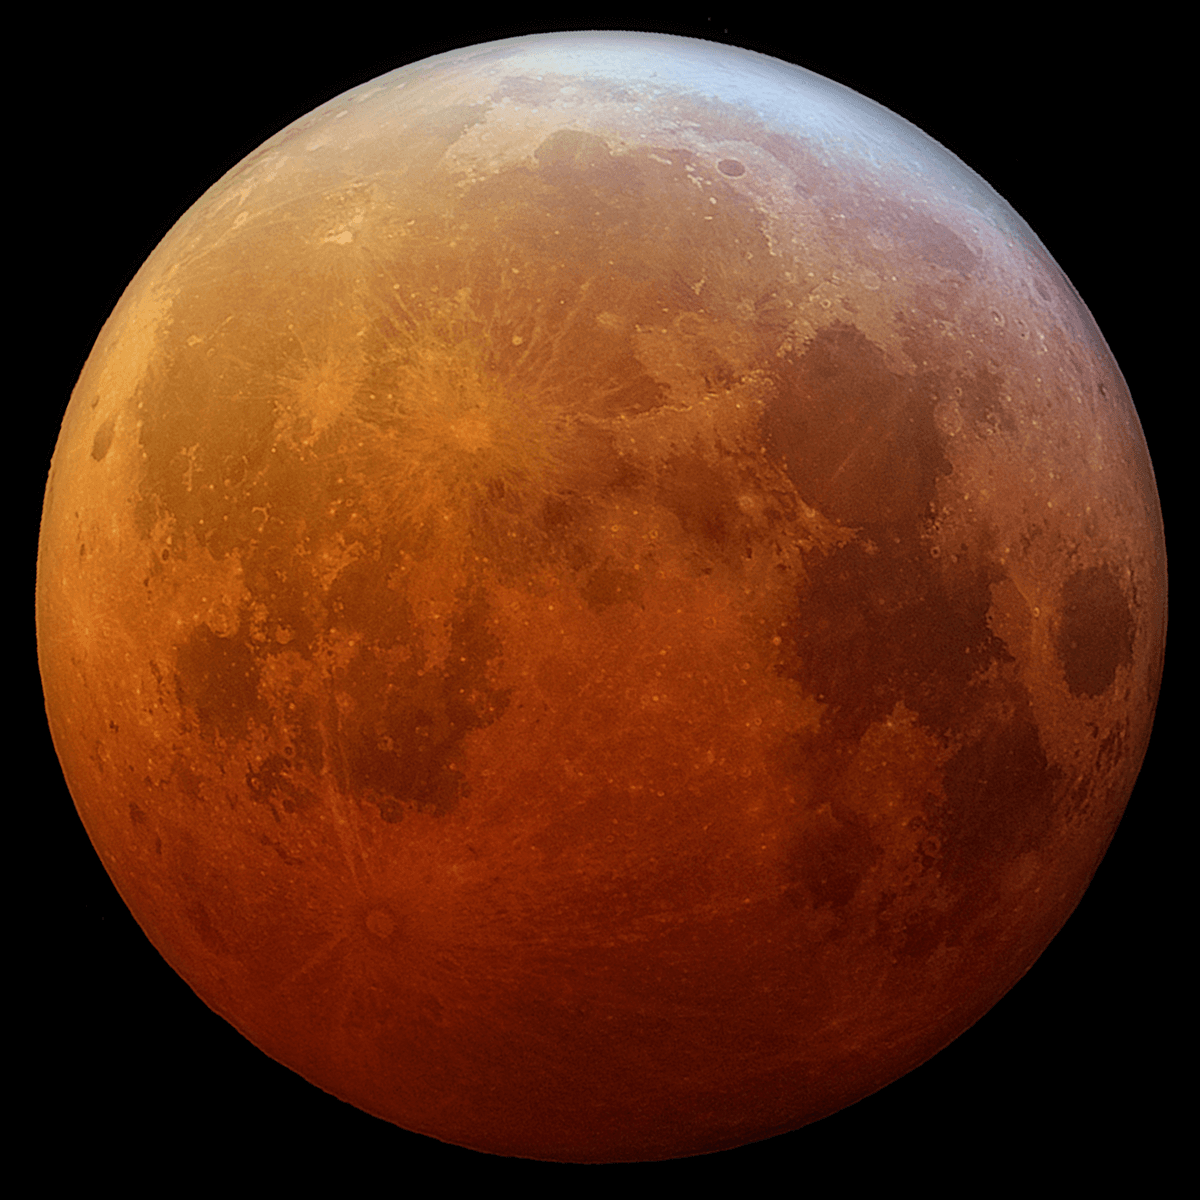 Photo of the Moon appearing reddish in color.